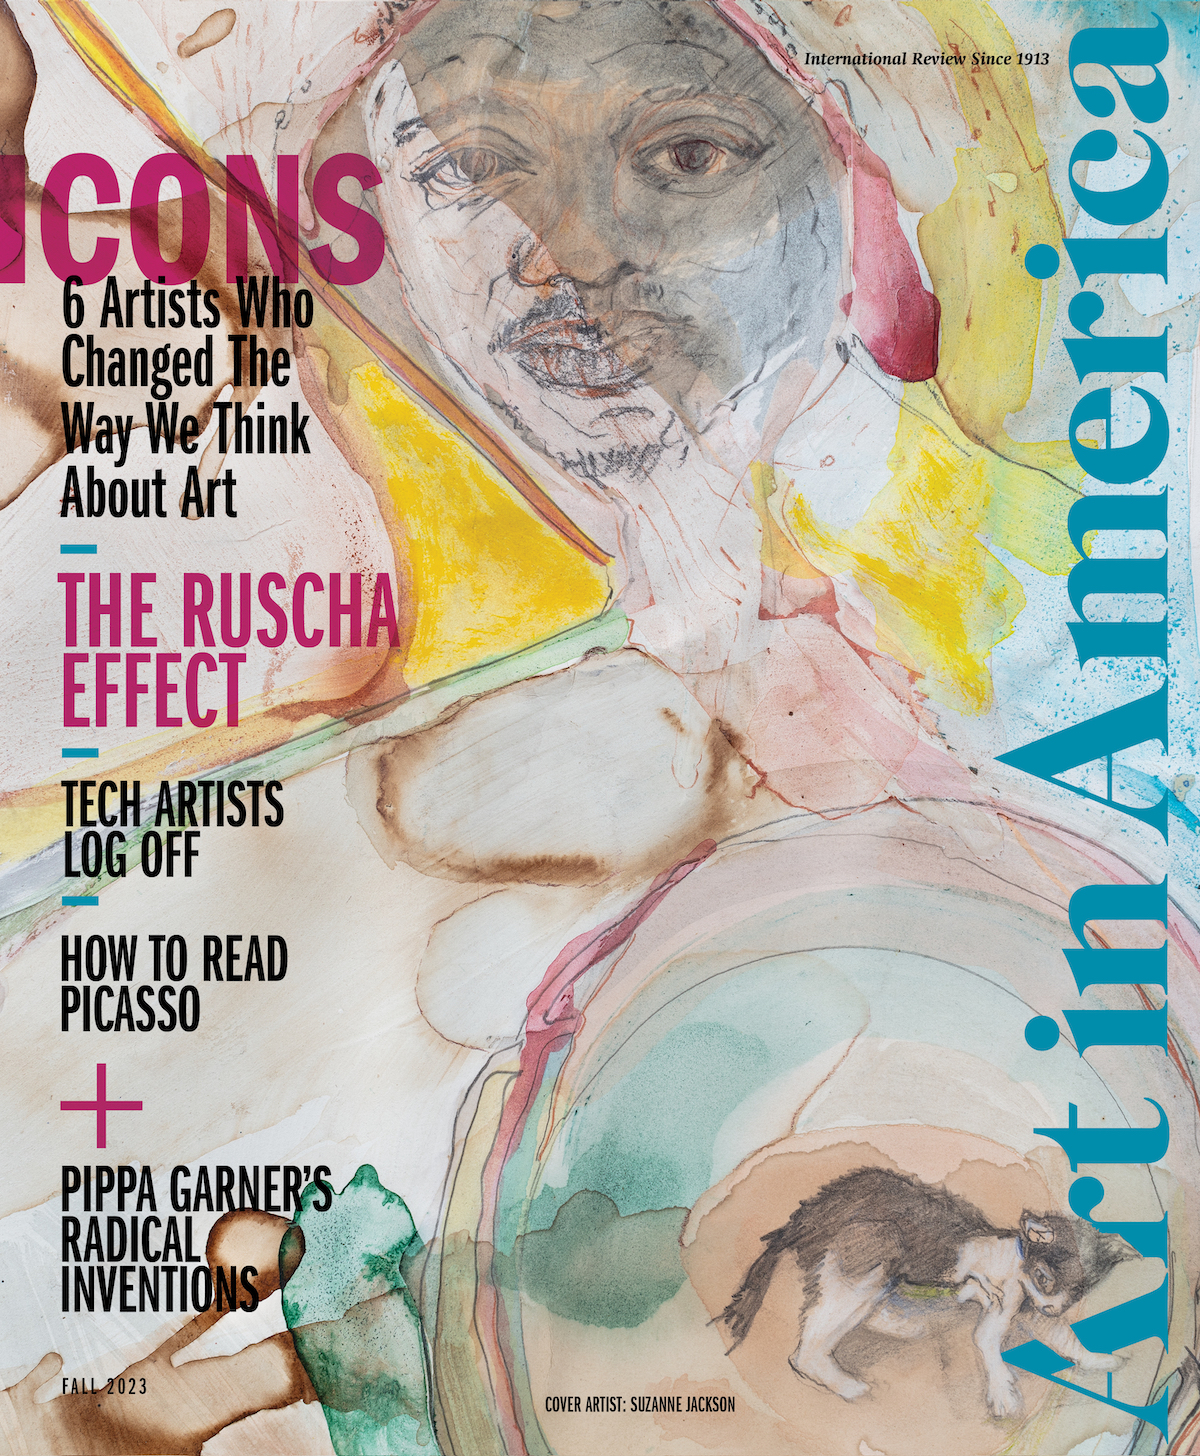 A painting of a human face and a cat against an abstract background. Text reads: Icons, 6 Artists Who Changed The Way We Think About Art; The Ruscha Effect; Tech Artists Log Off; How to Read Picasso; and Pippa Garner's Radical Inventions.